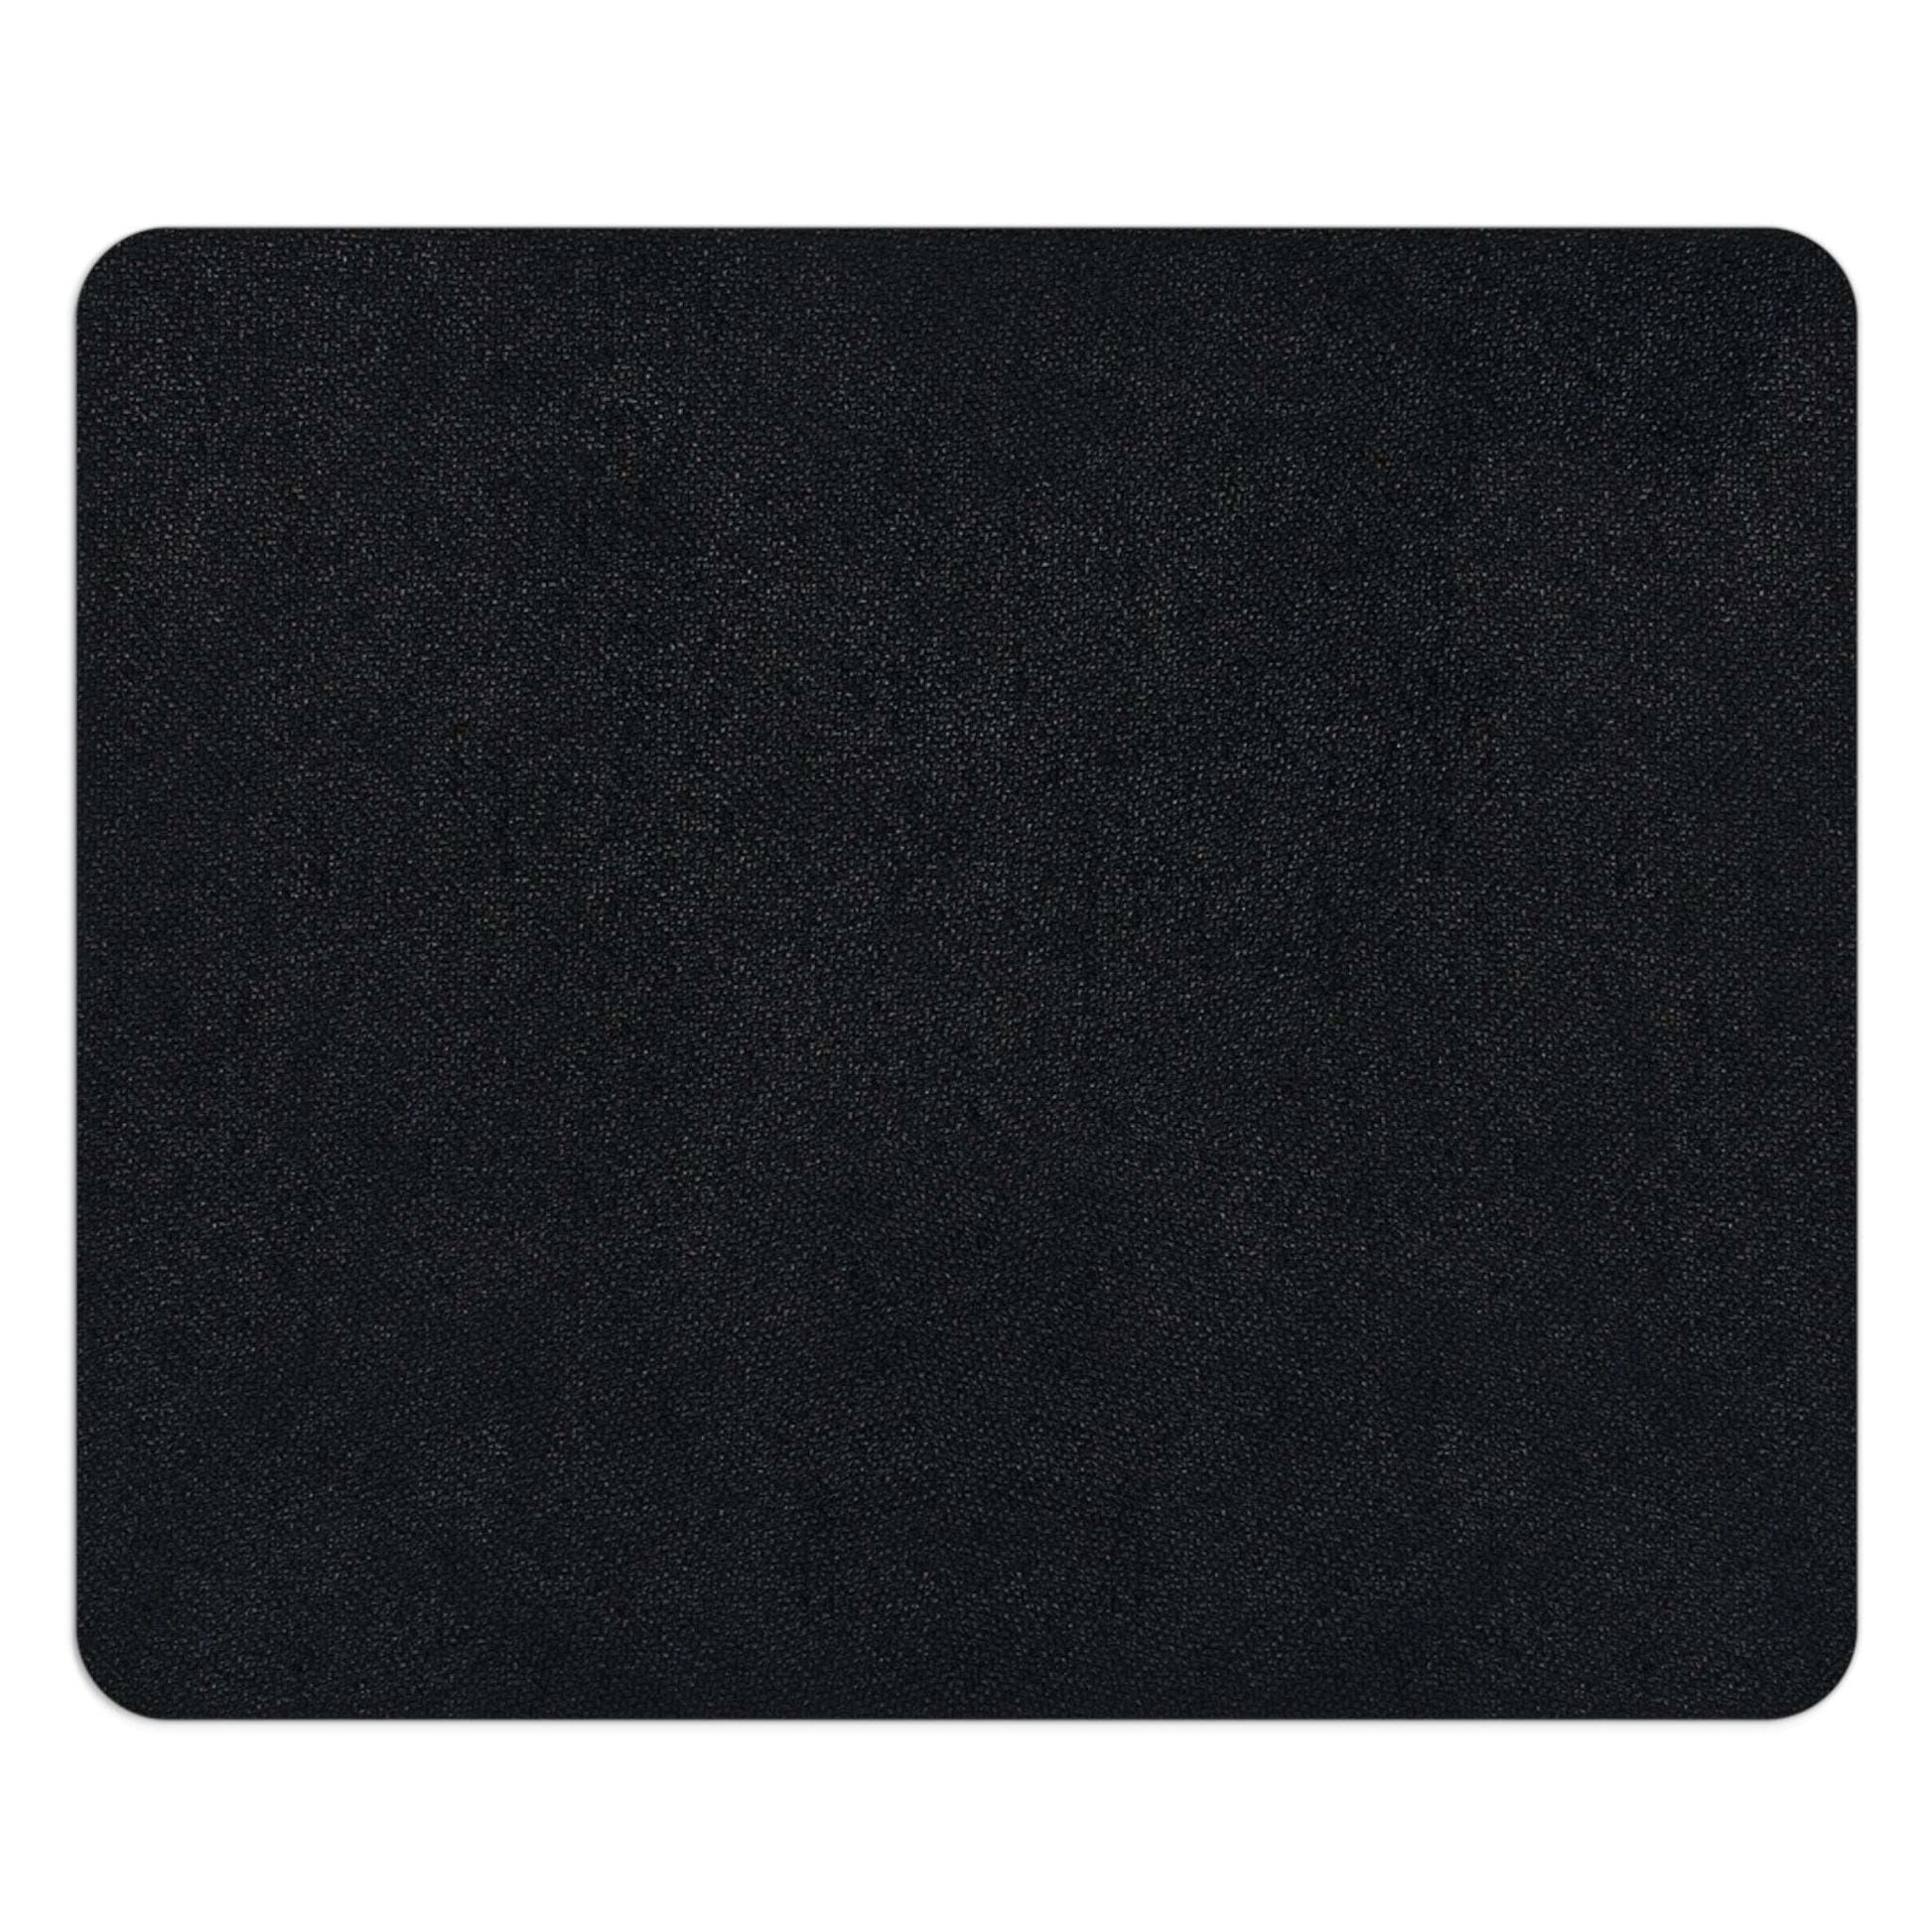 Computer Mouse Pad, Non-slip rubber bottom, Colorful Flowers on Black